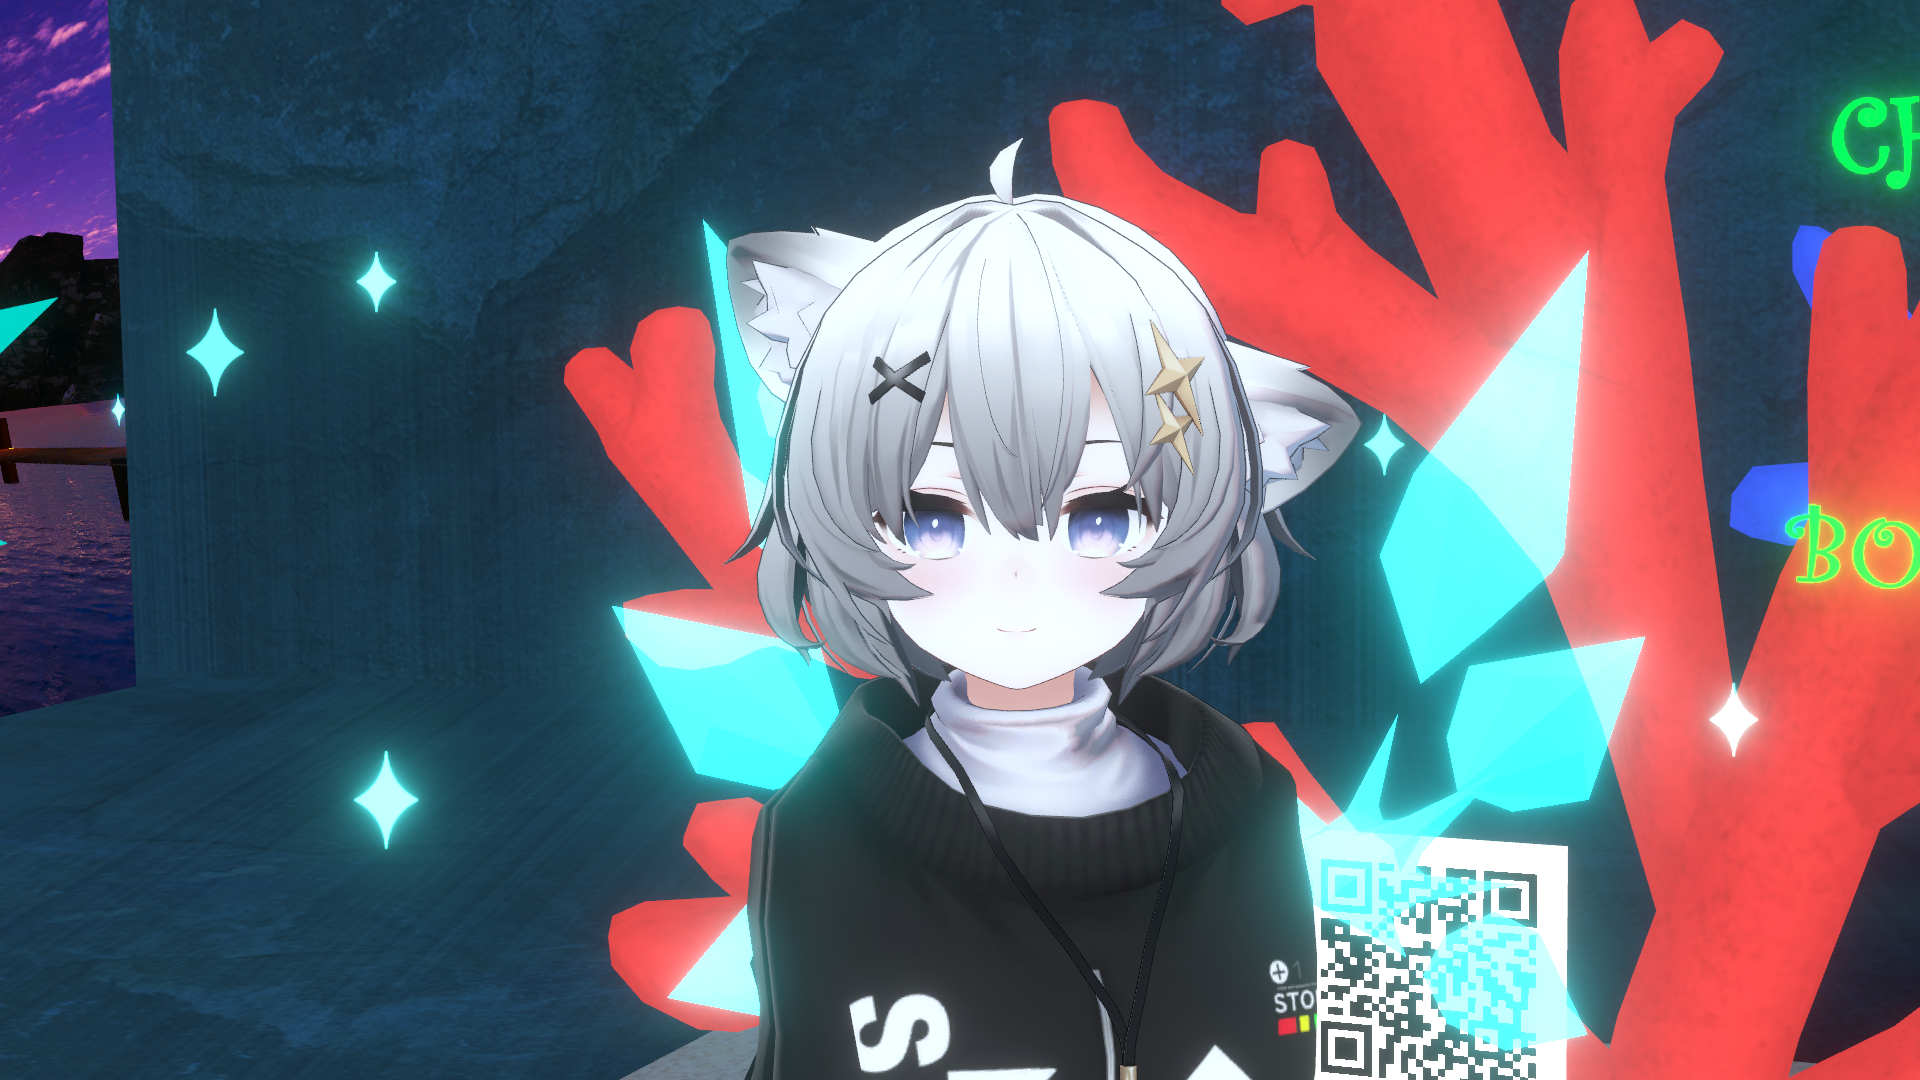 VRChat_1920x1080_2021-12-05_04-01-58.627.png